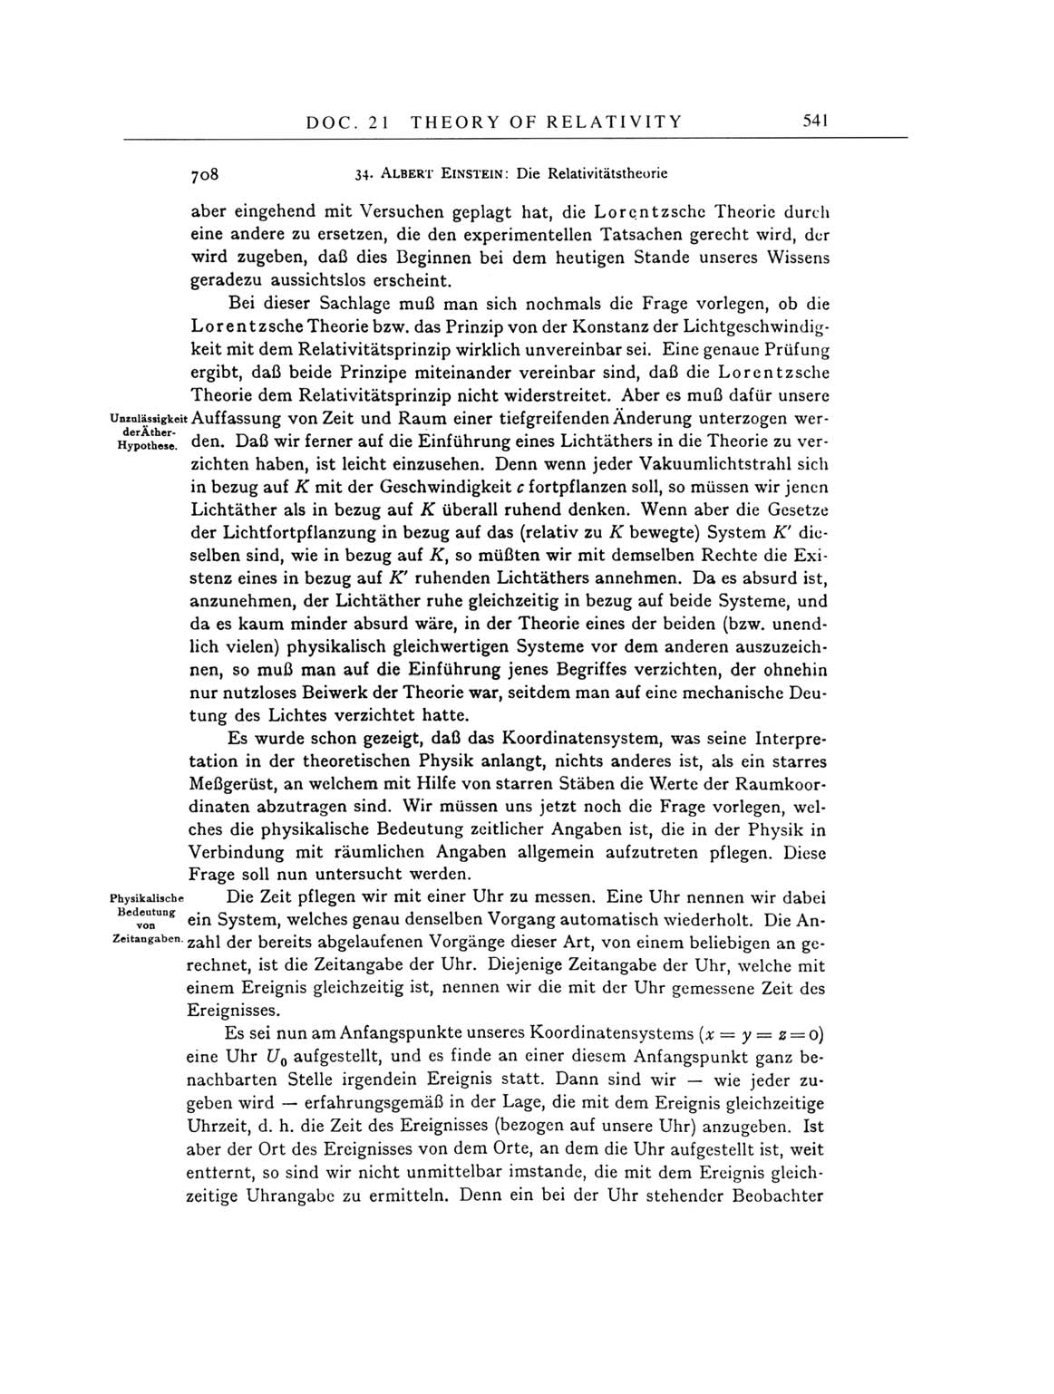 Volume 4: The Swiss Years: Writings 1912-1914 page 541